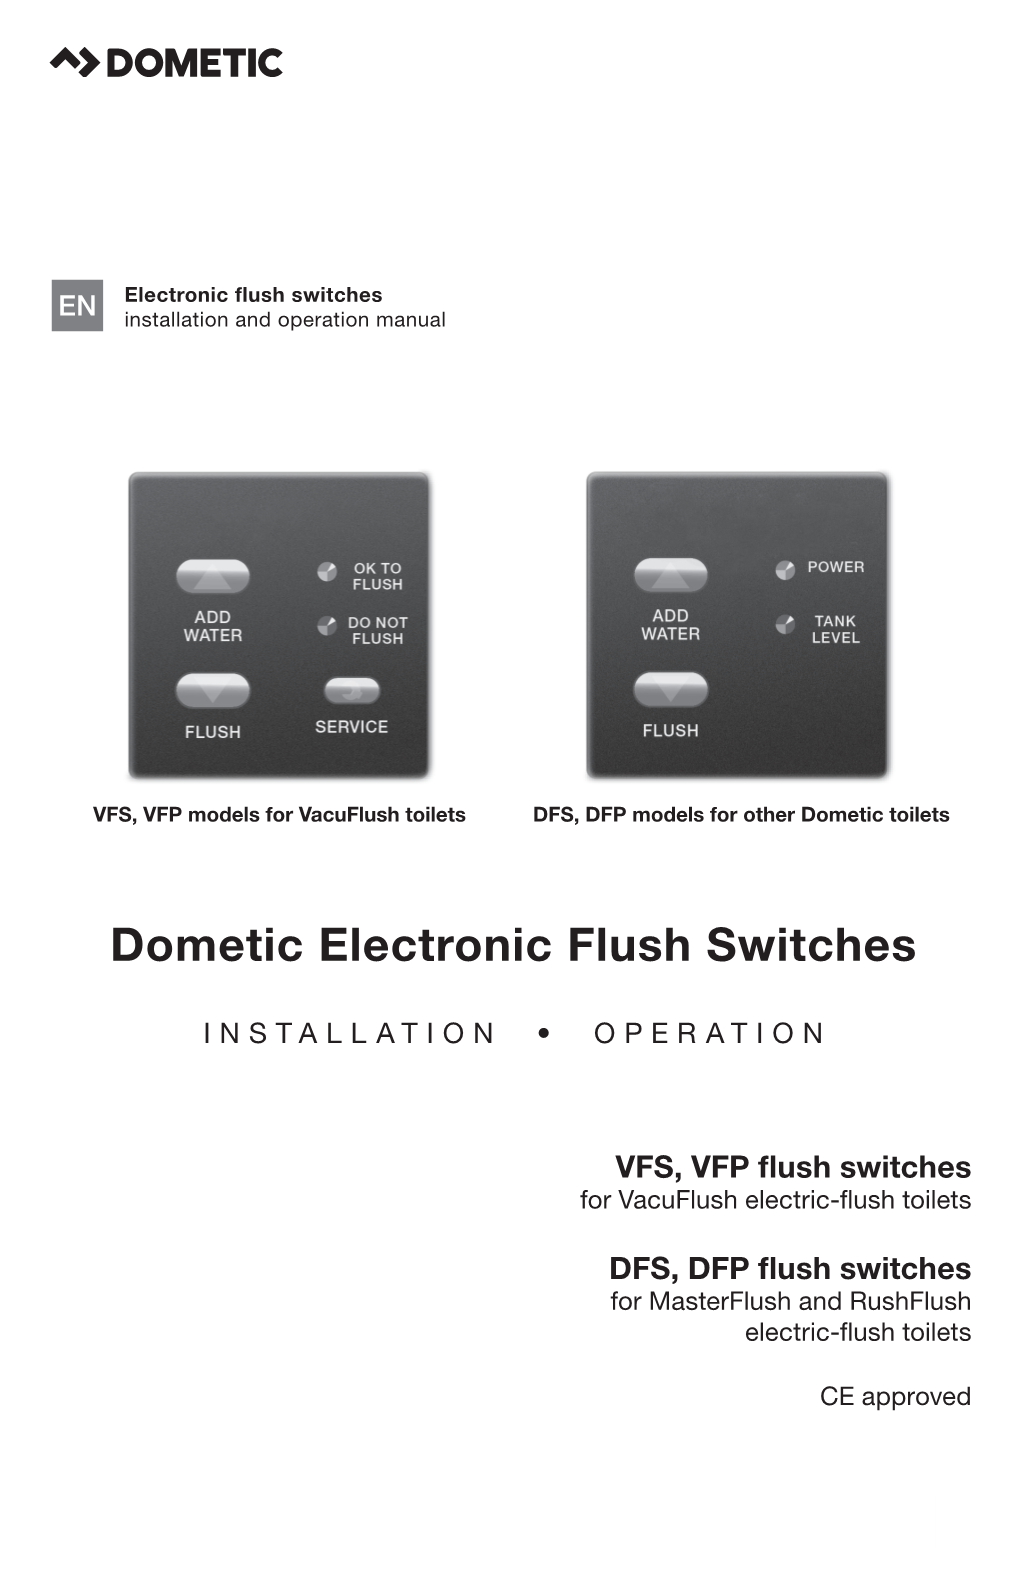 7/7/17 Dometic Electronic Toilet Flush Switches Instruction and Operation